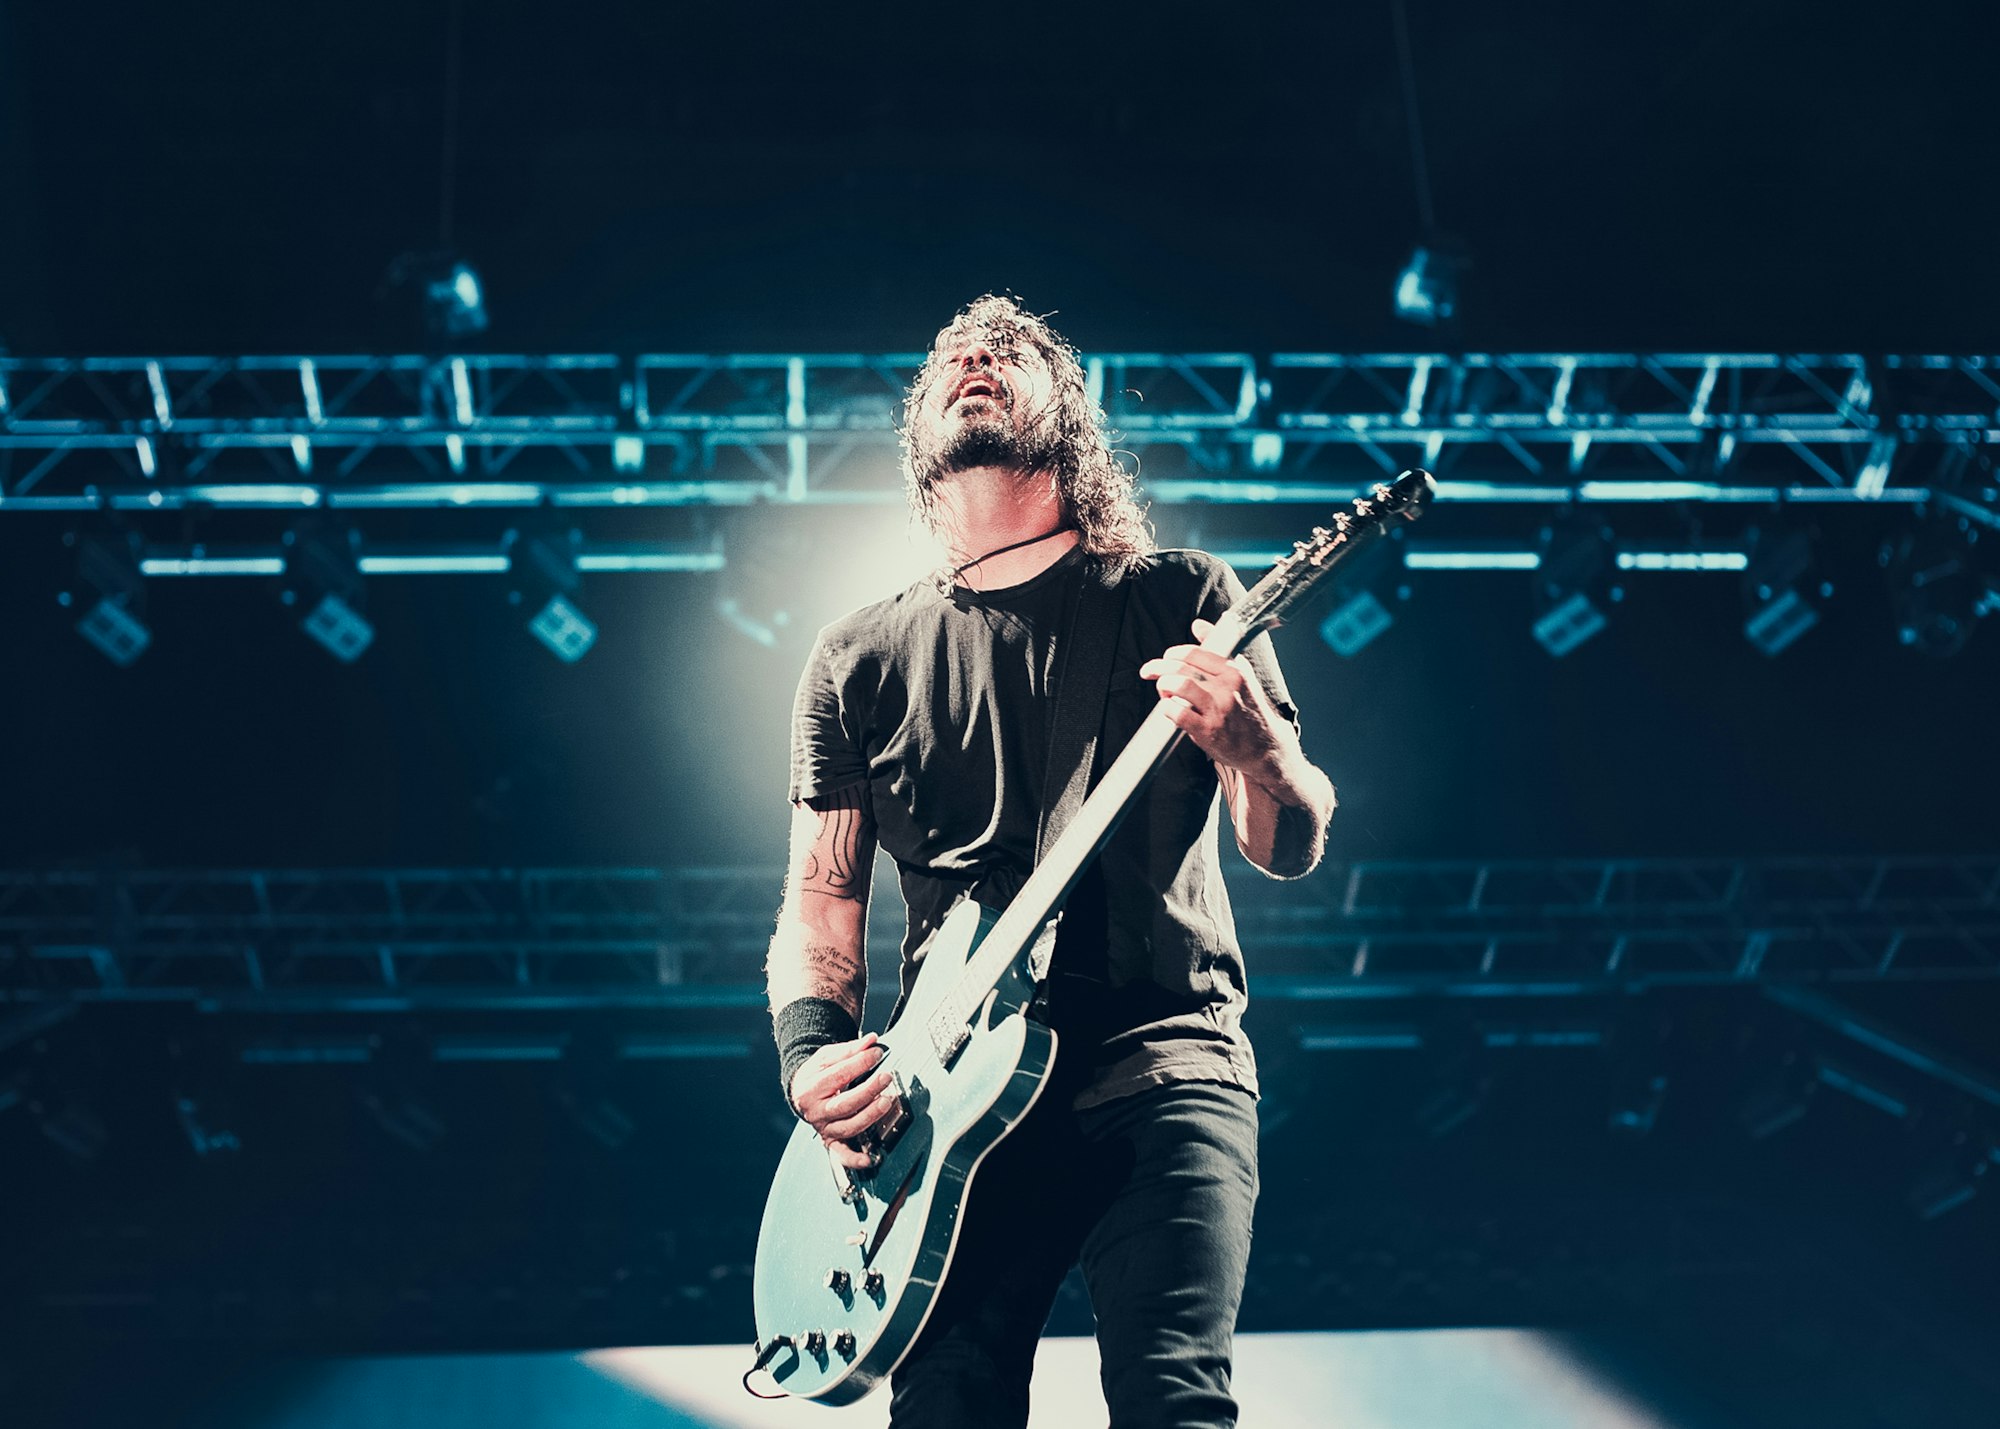 foo fighters uk tour vip tickets